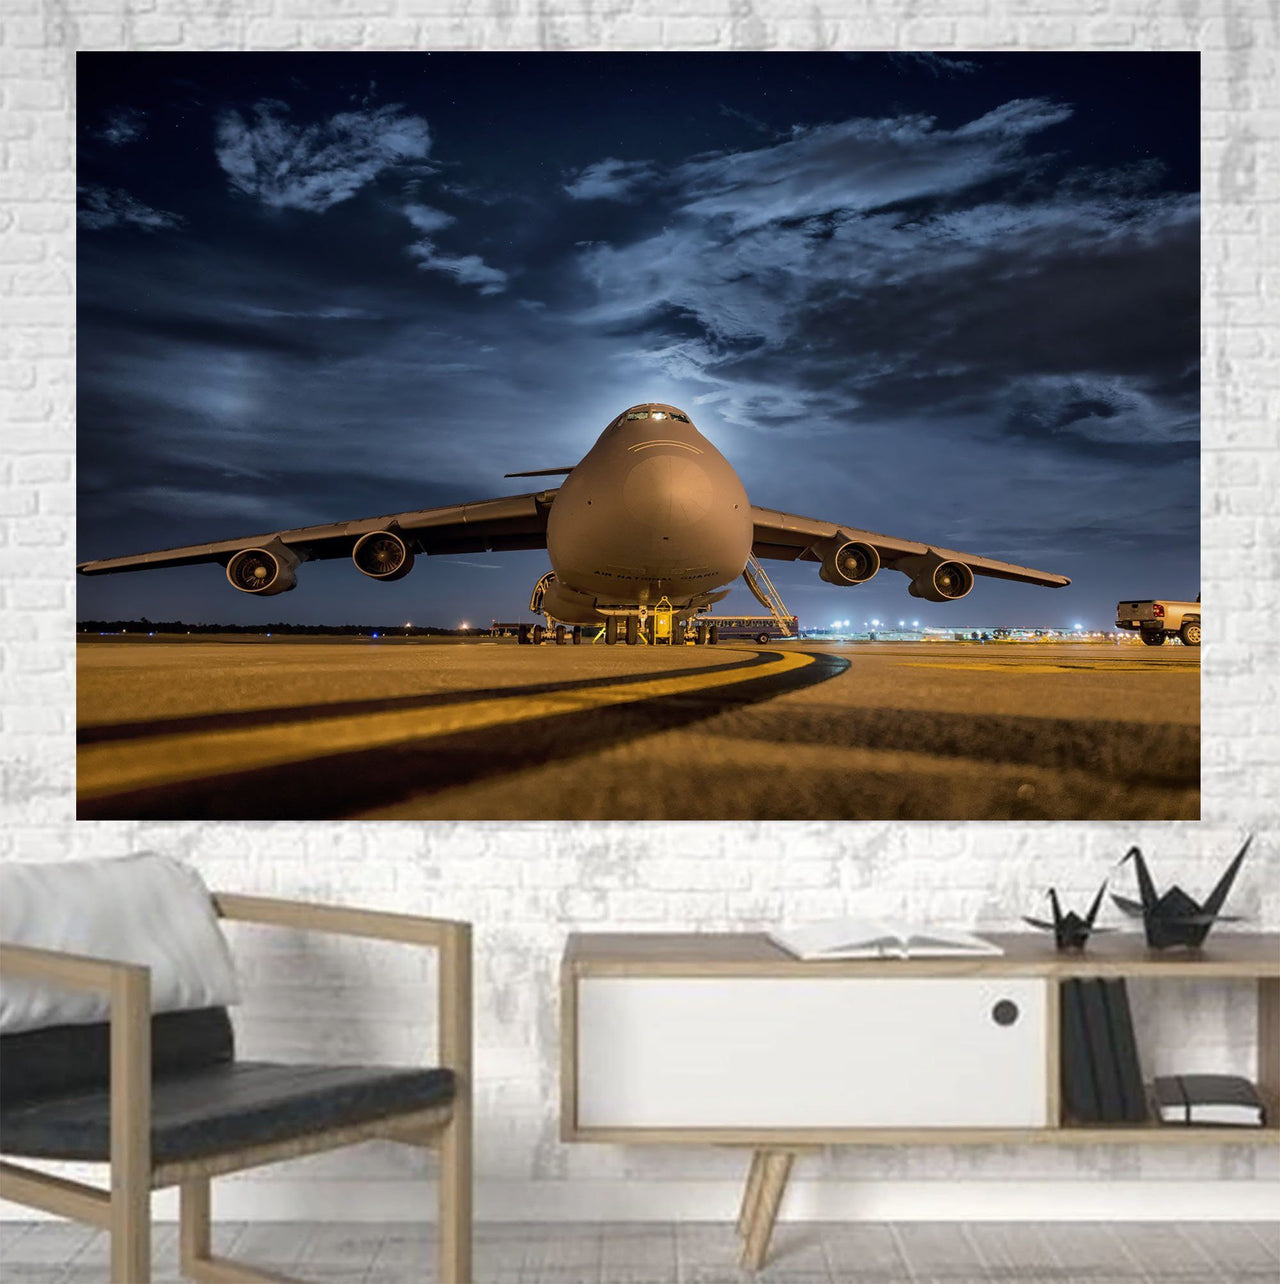 Amazing Military Aircraft at Night Printed Canvas Posters (1 Piece) Aviation Shop 